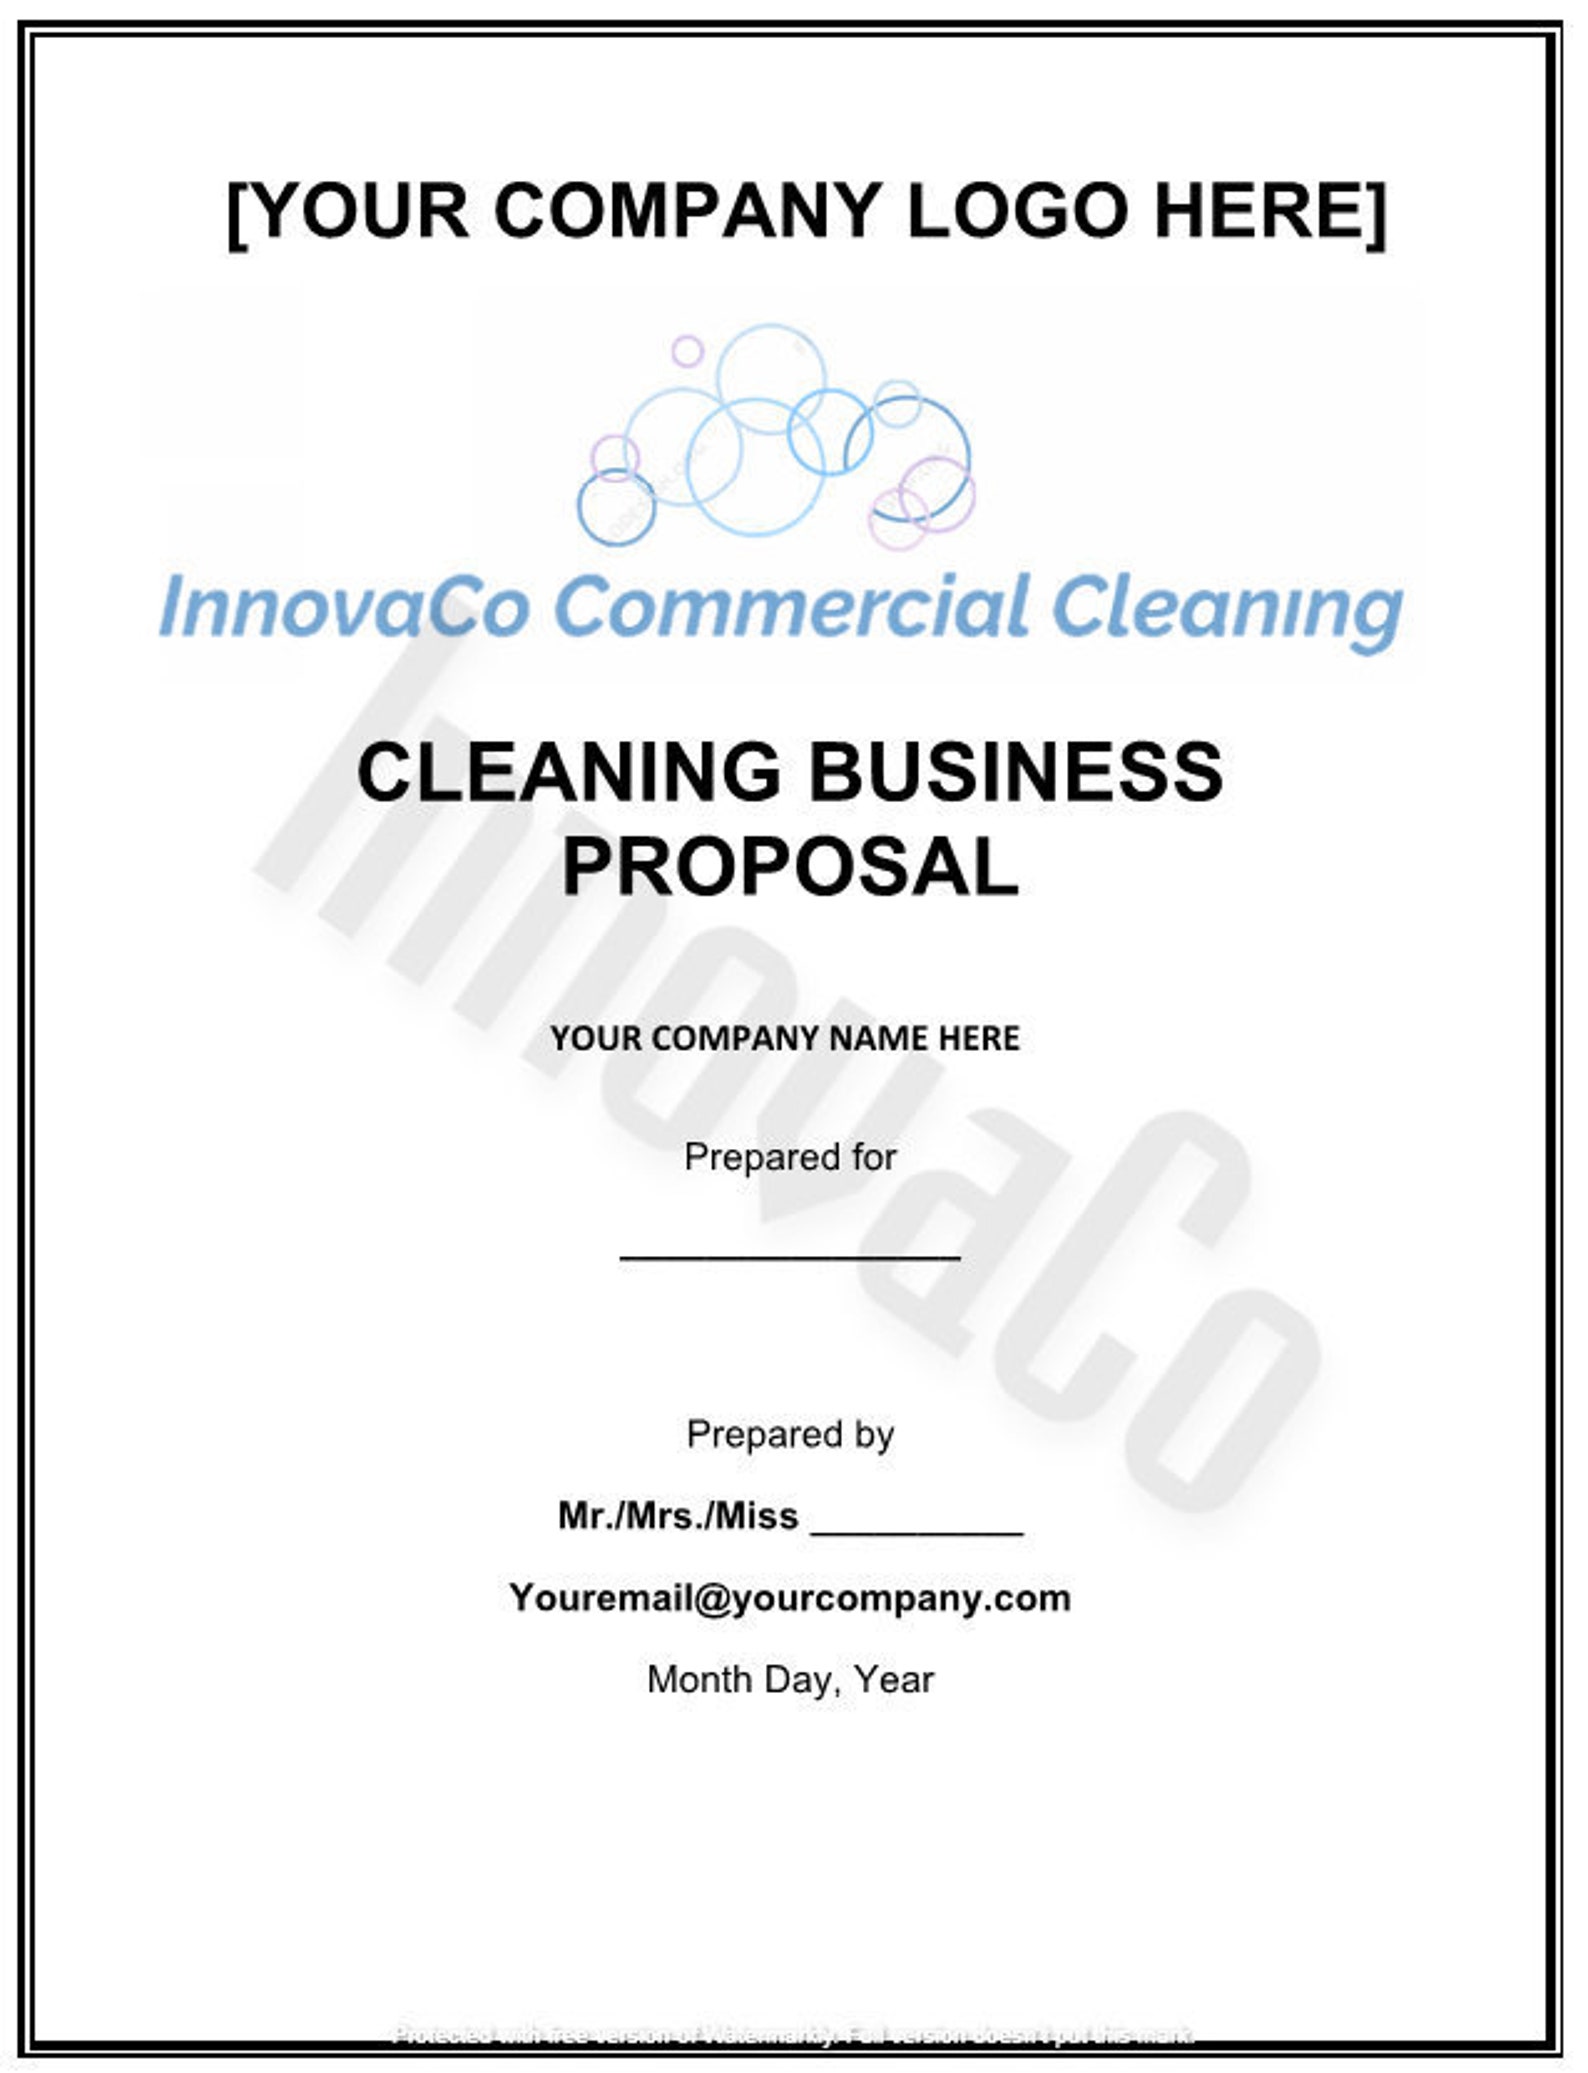 sample business plan cleaning services